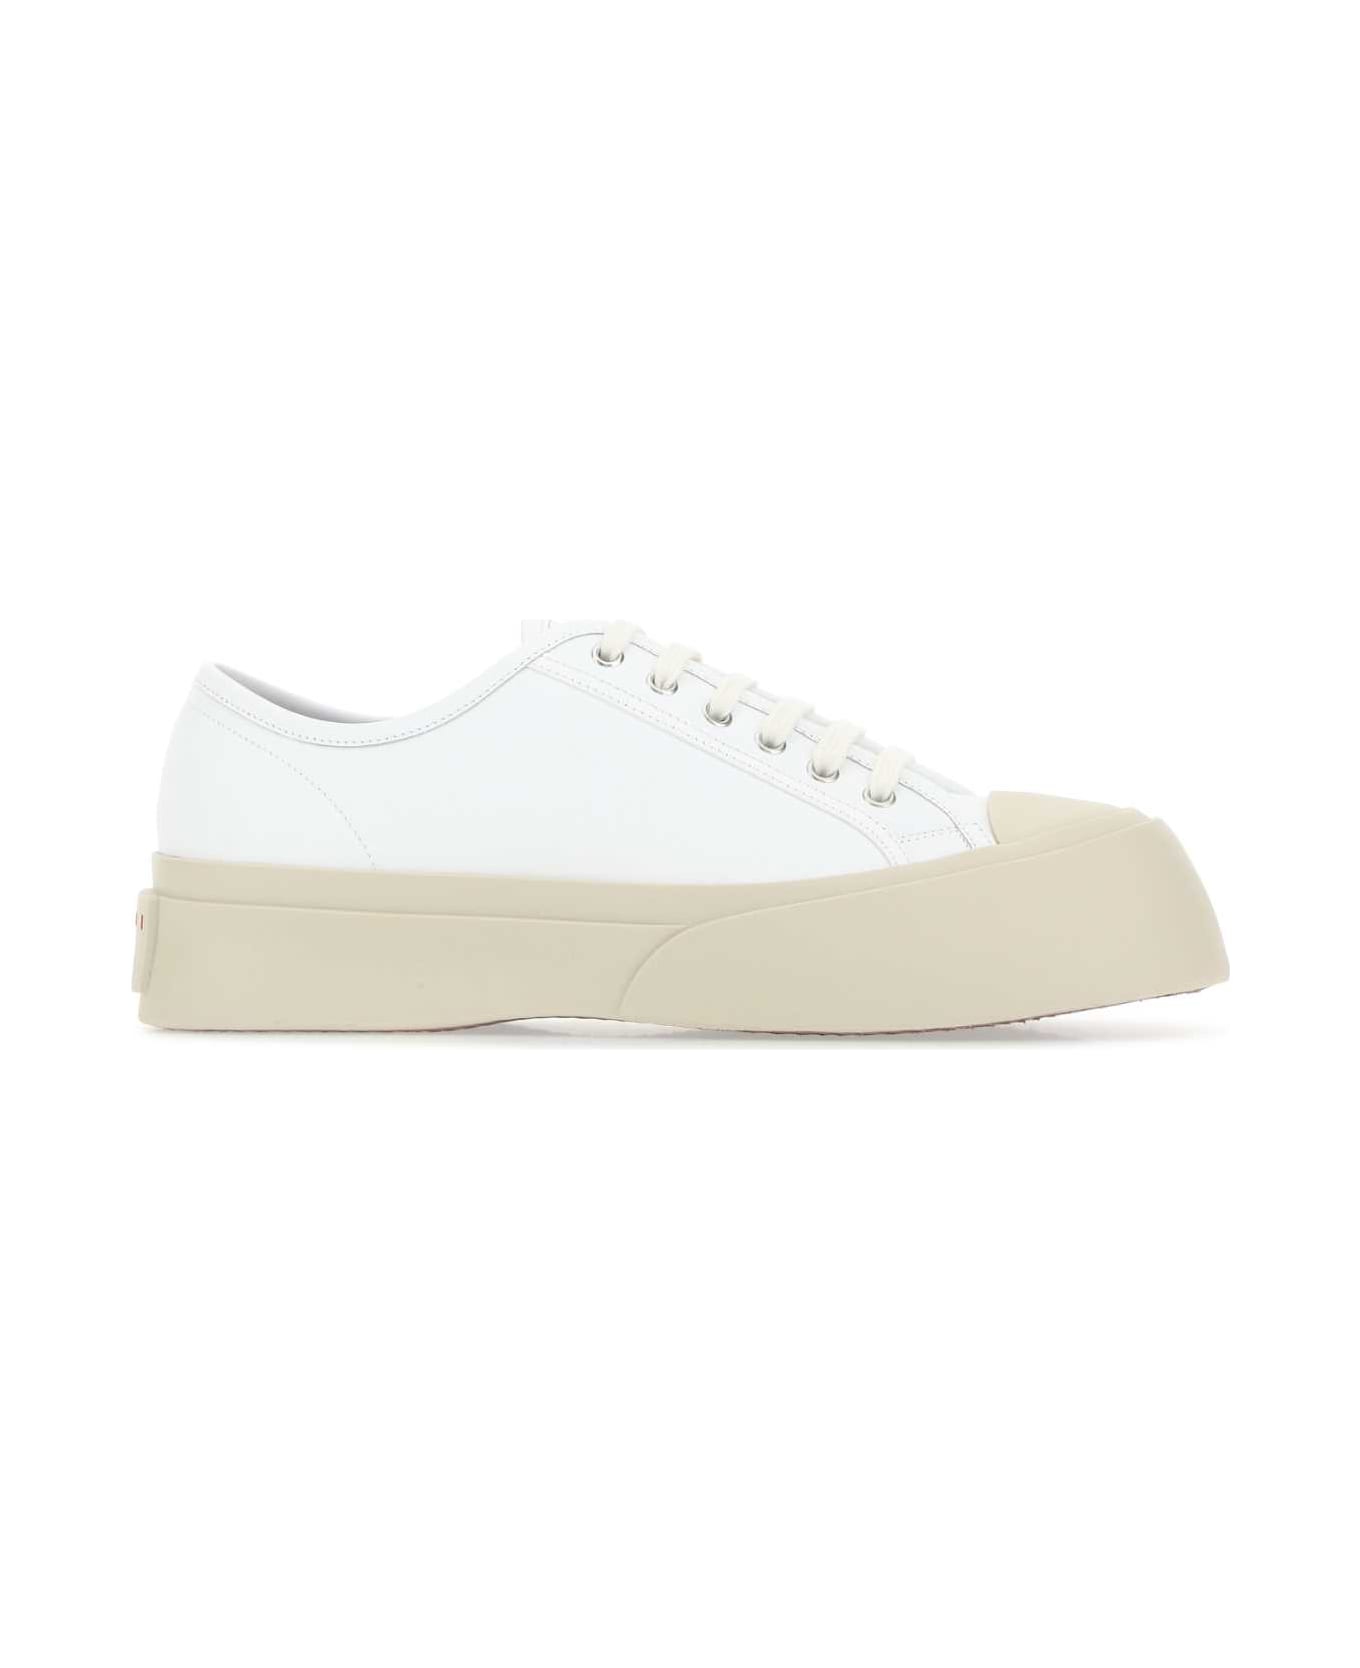 Marni White Leather Pablo Sneakers - 00W01 スニーカー